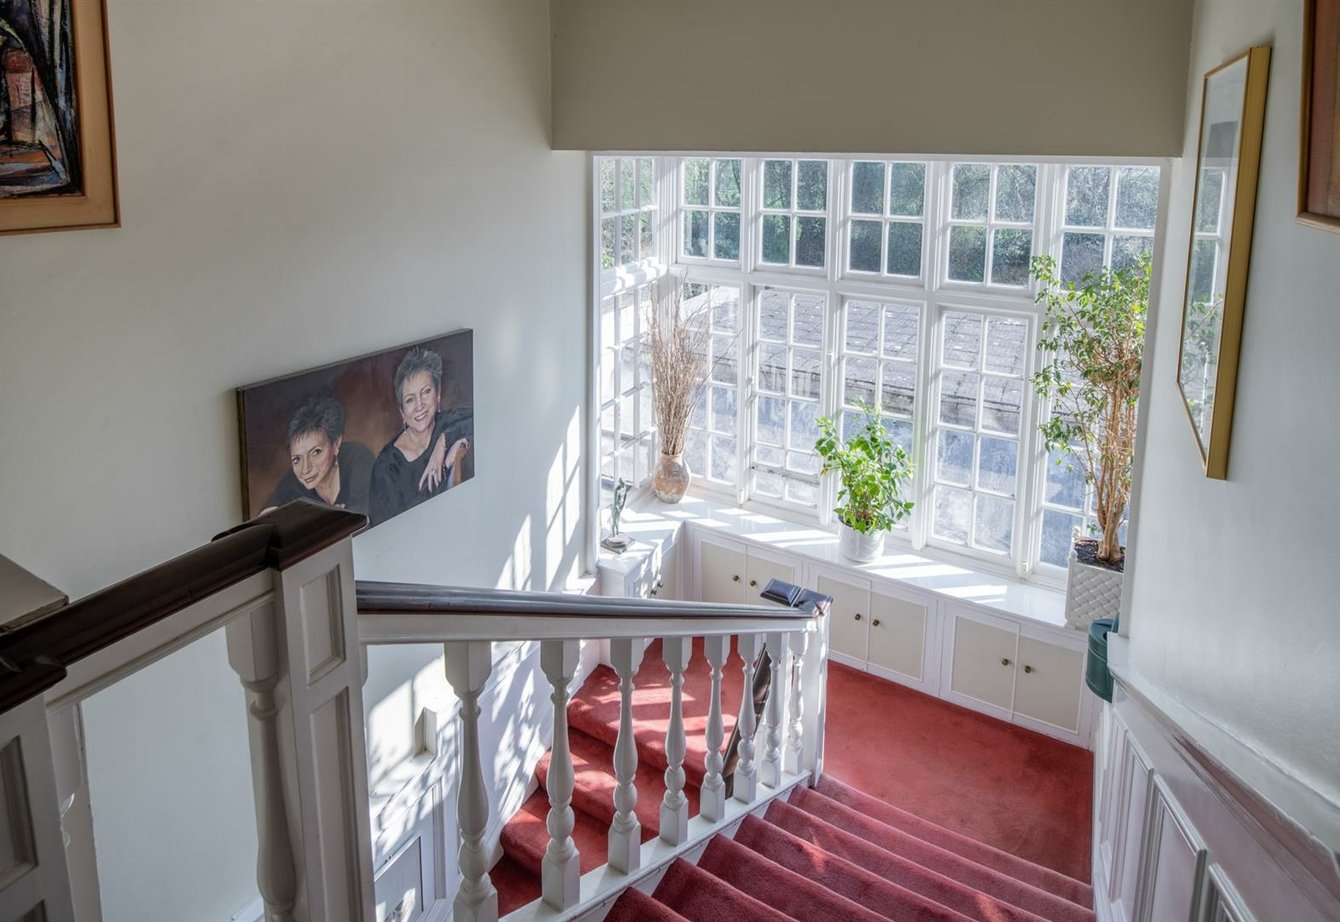 for-sale-elsworthy-road-london-343-view3